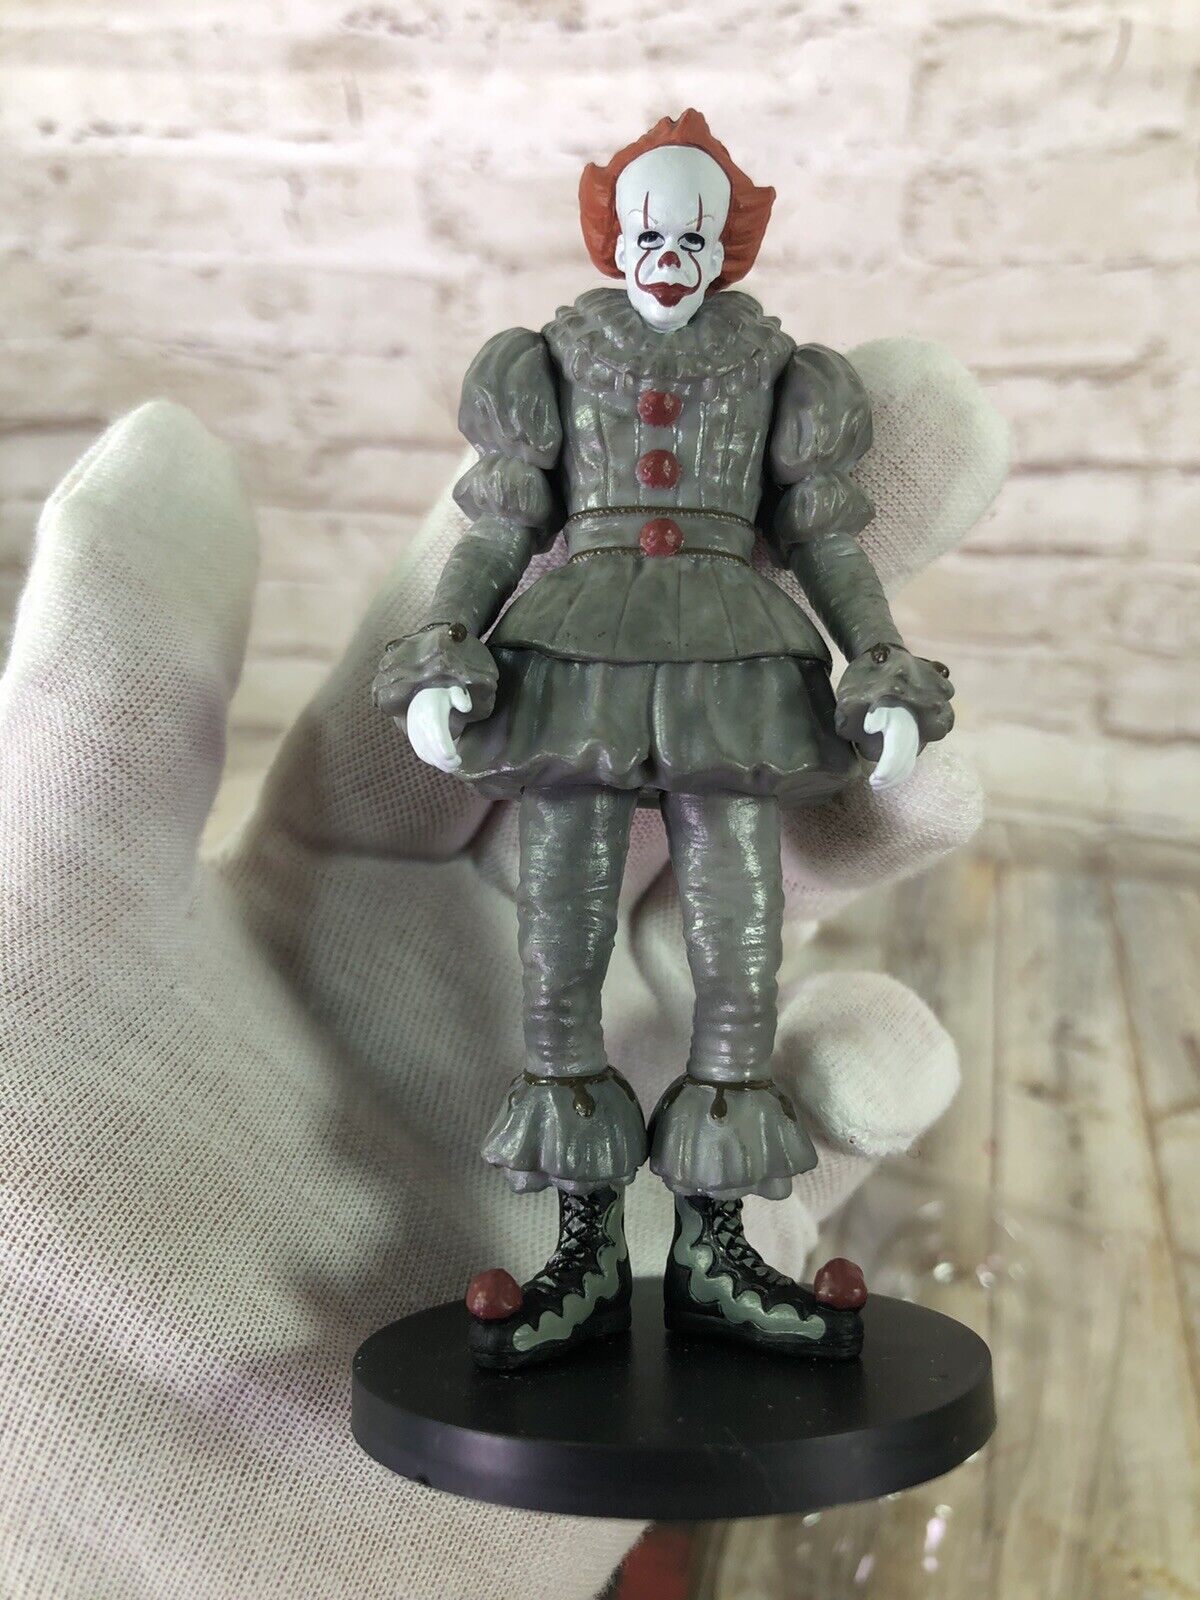 Culturefly - IT - Pennywise The Clown - Vinyl Figure - 5\